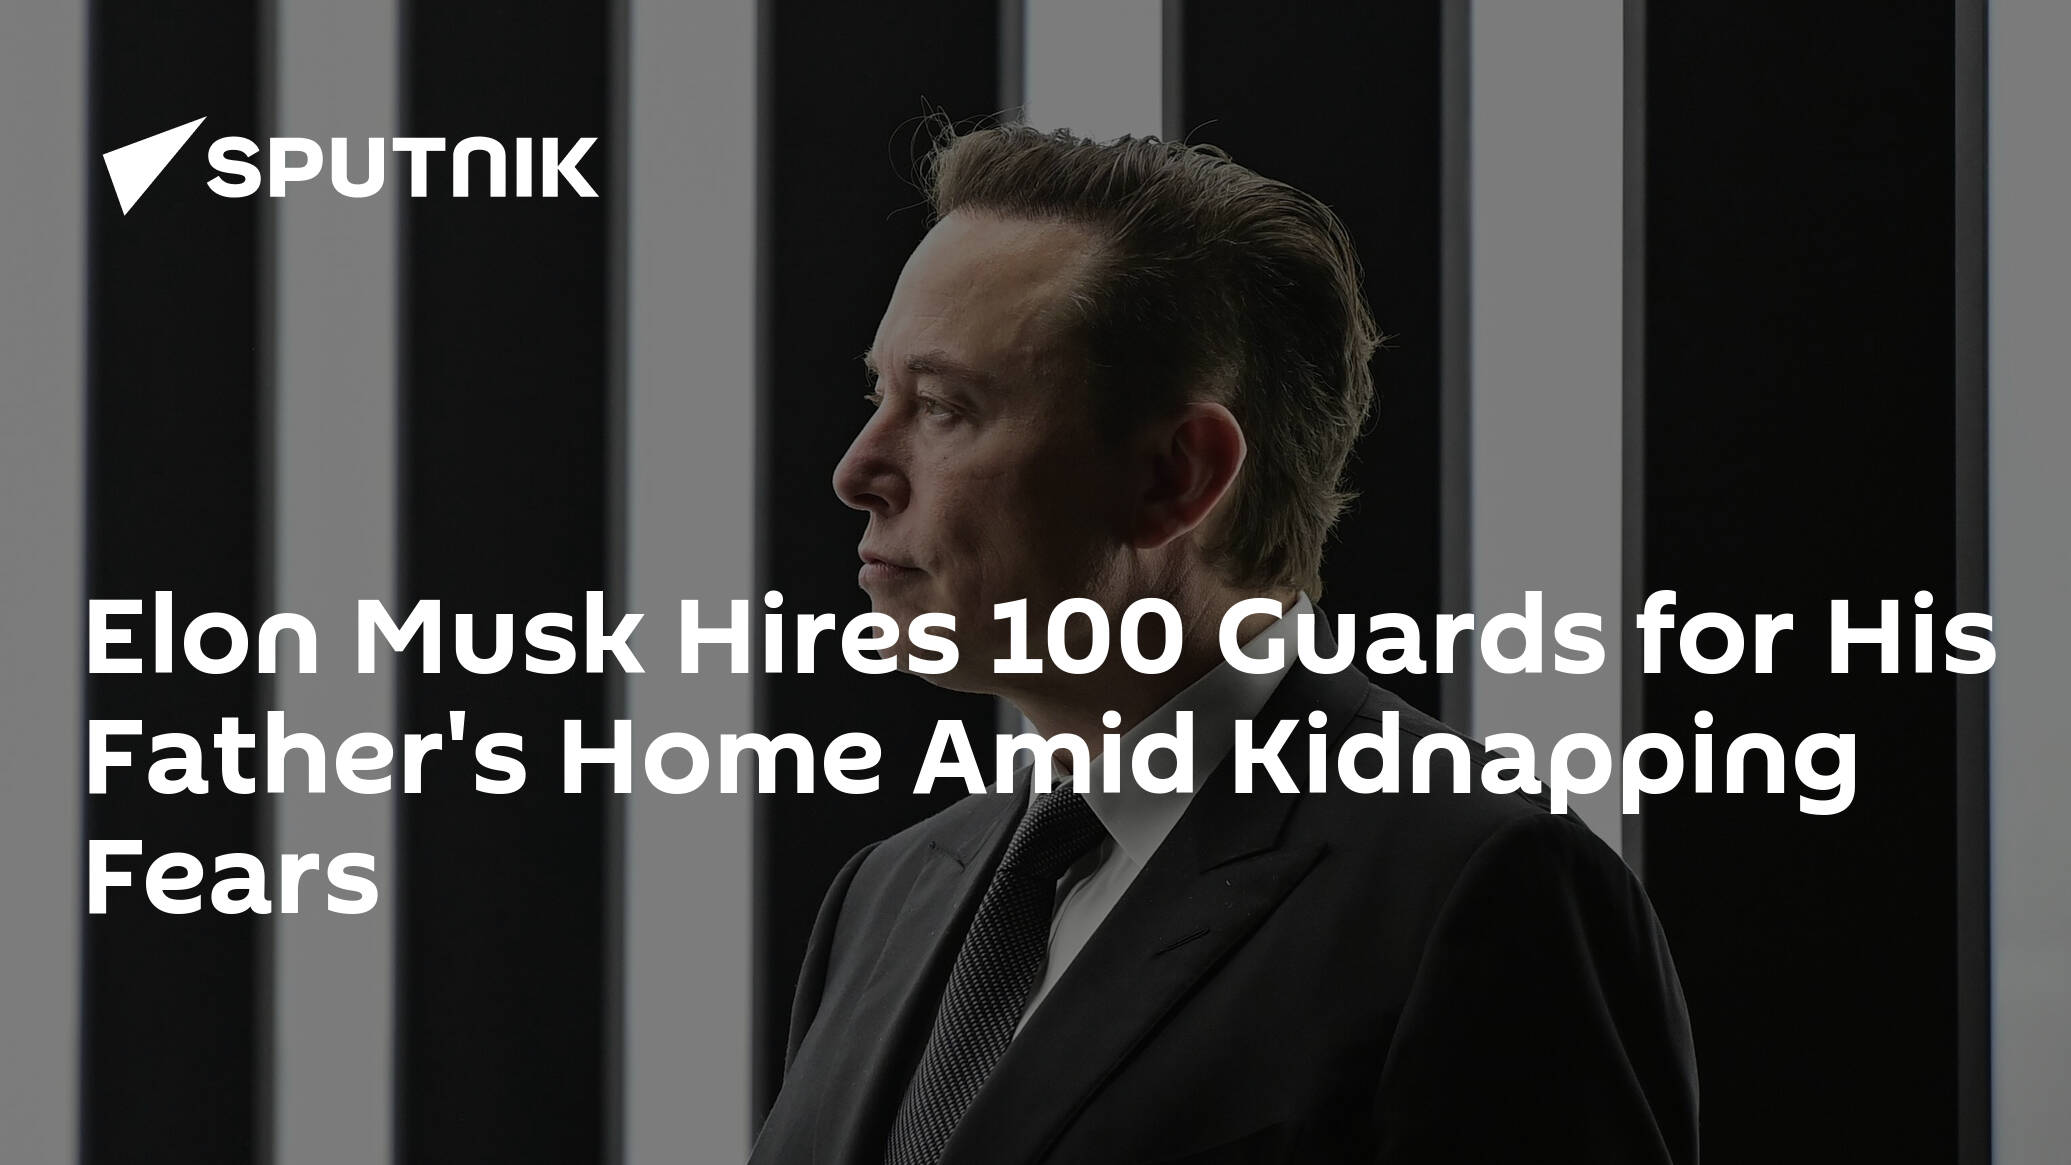 Elon Musk Hires 100 Guards for His Father's Home Amid Kidnapping Fears